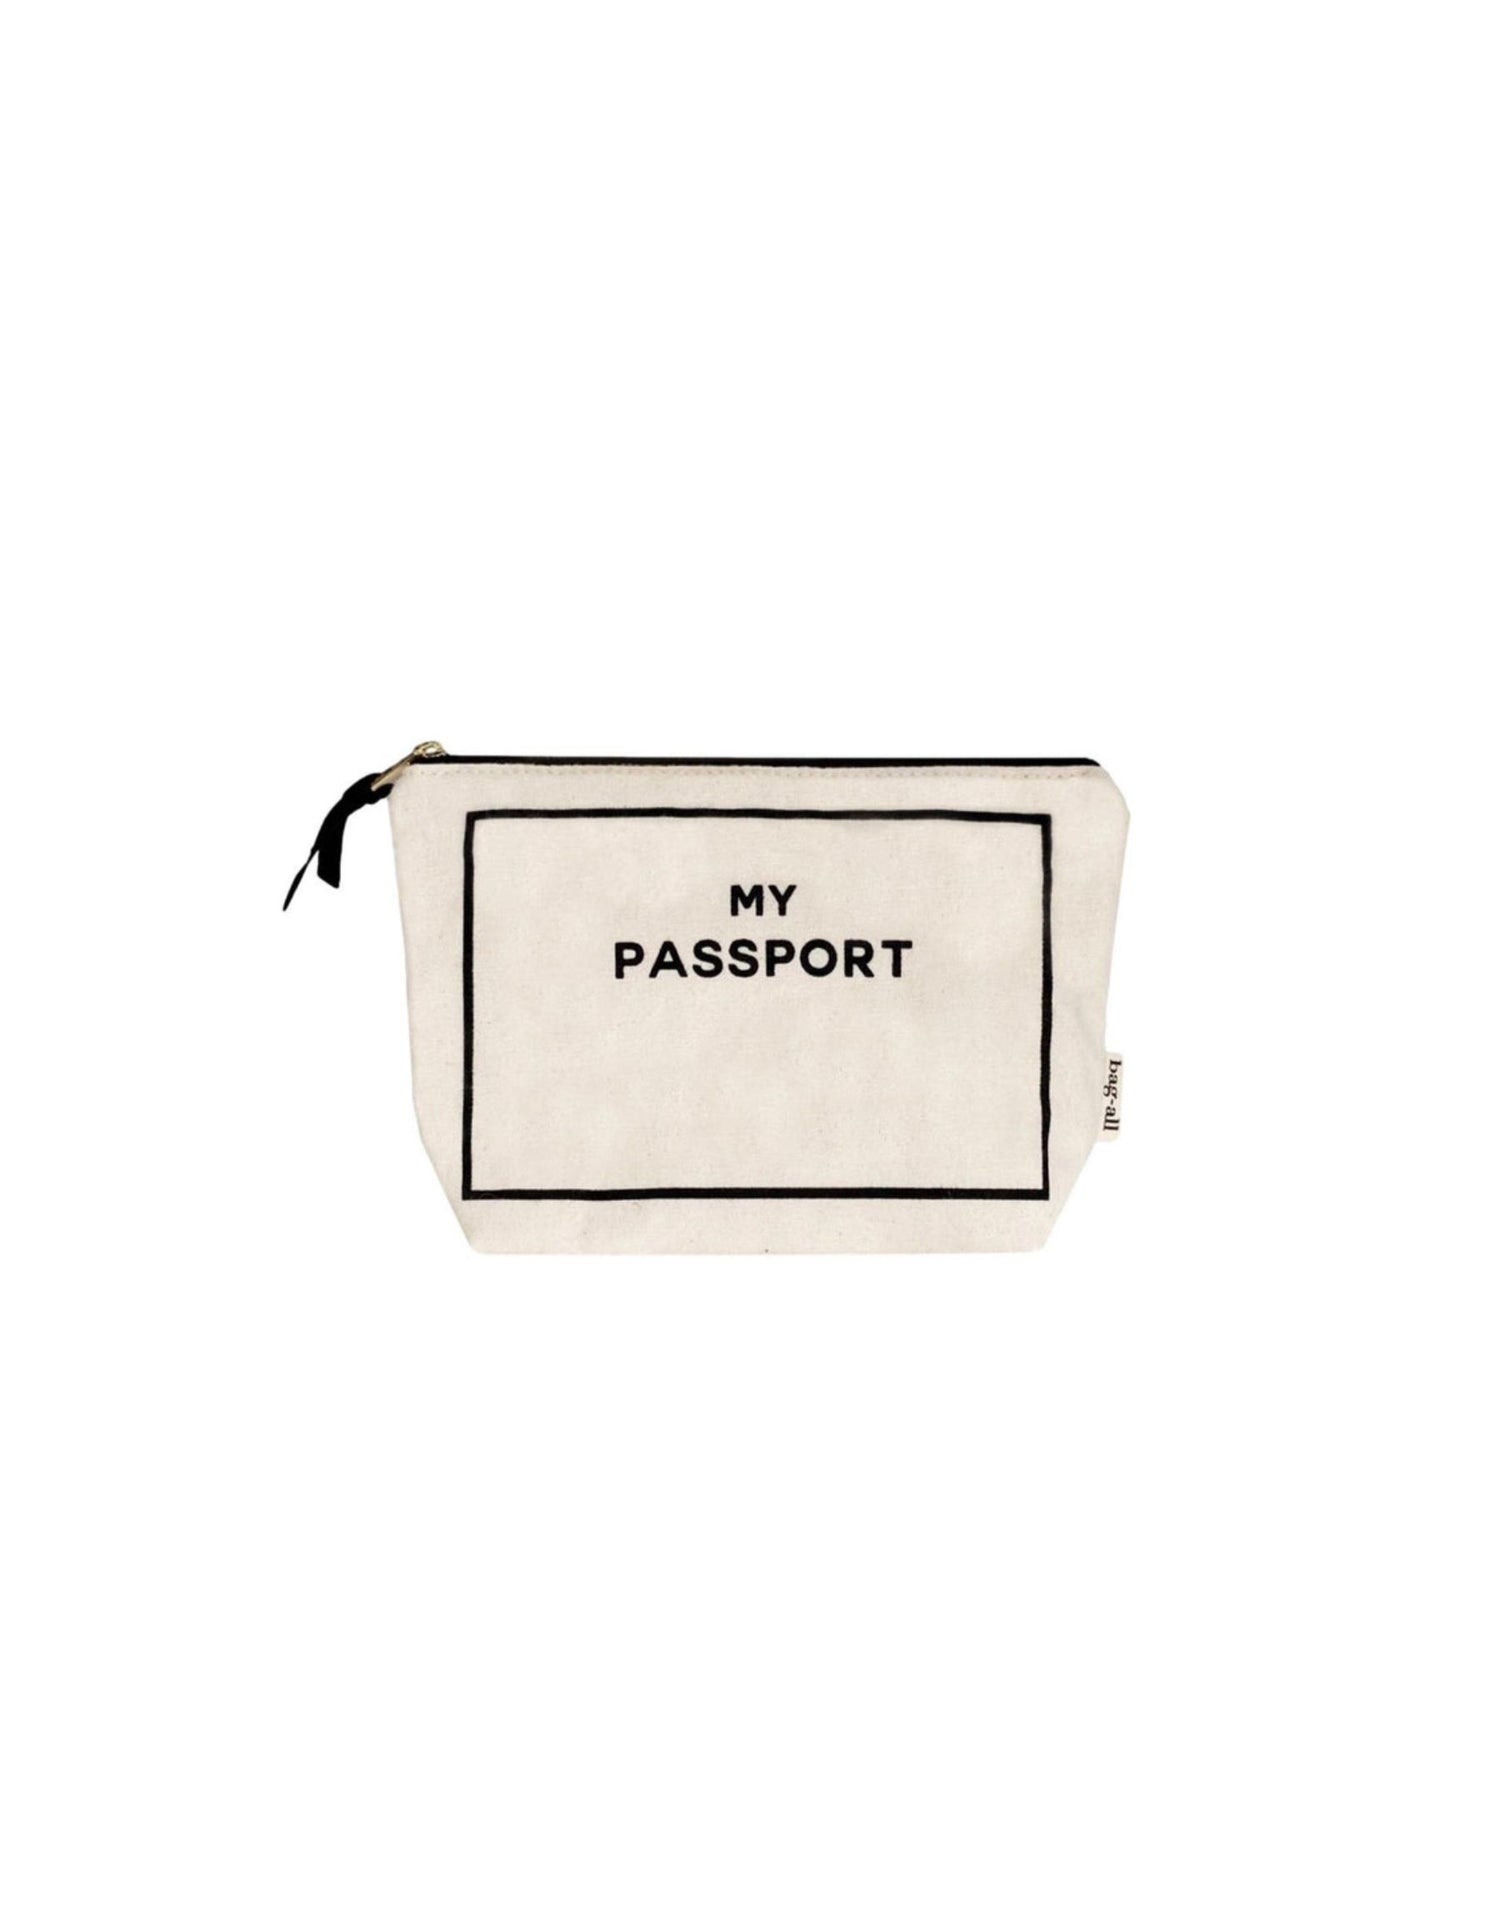 My Passport Case in Natural by Bag-all - Alternate Product View